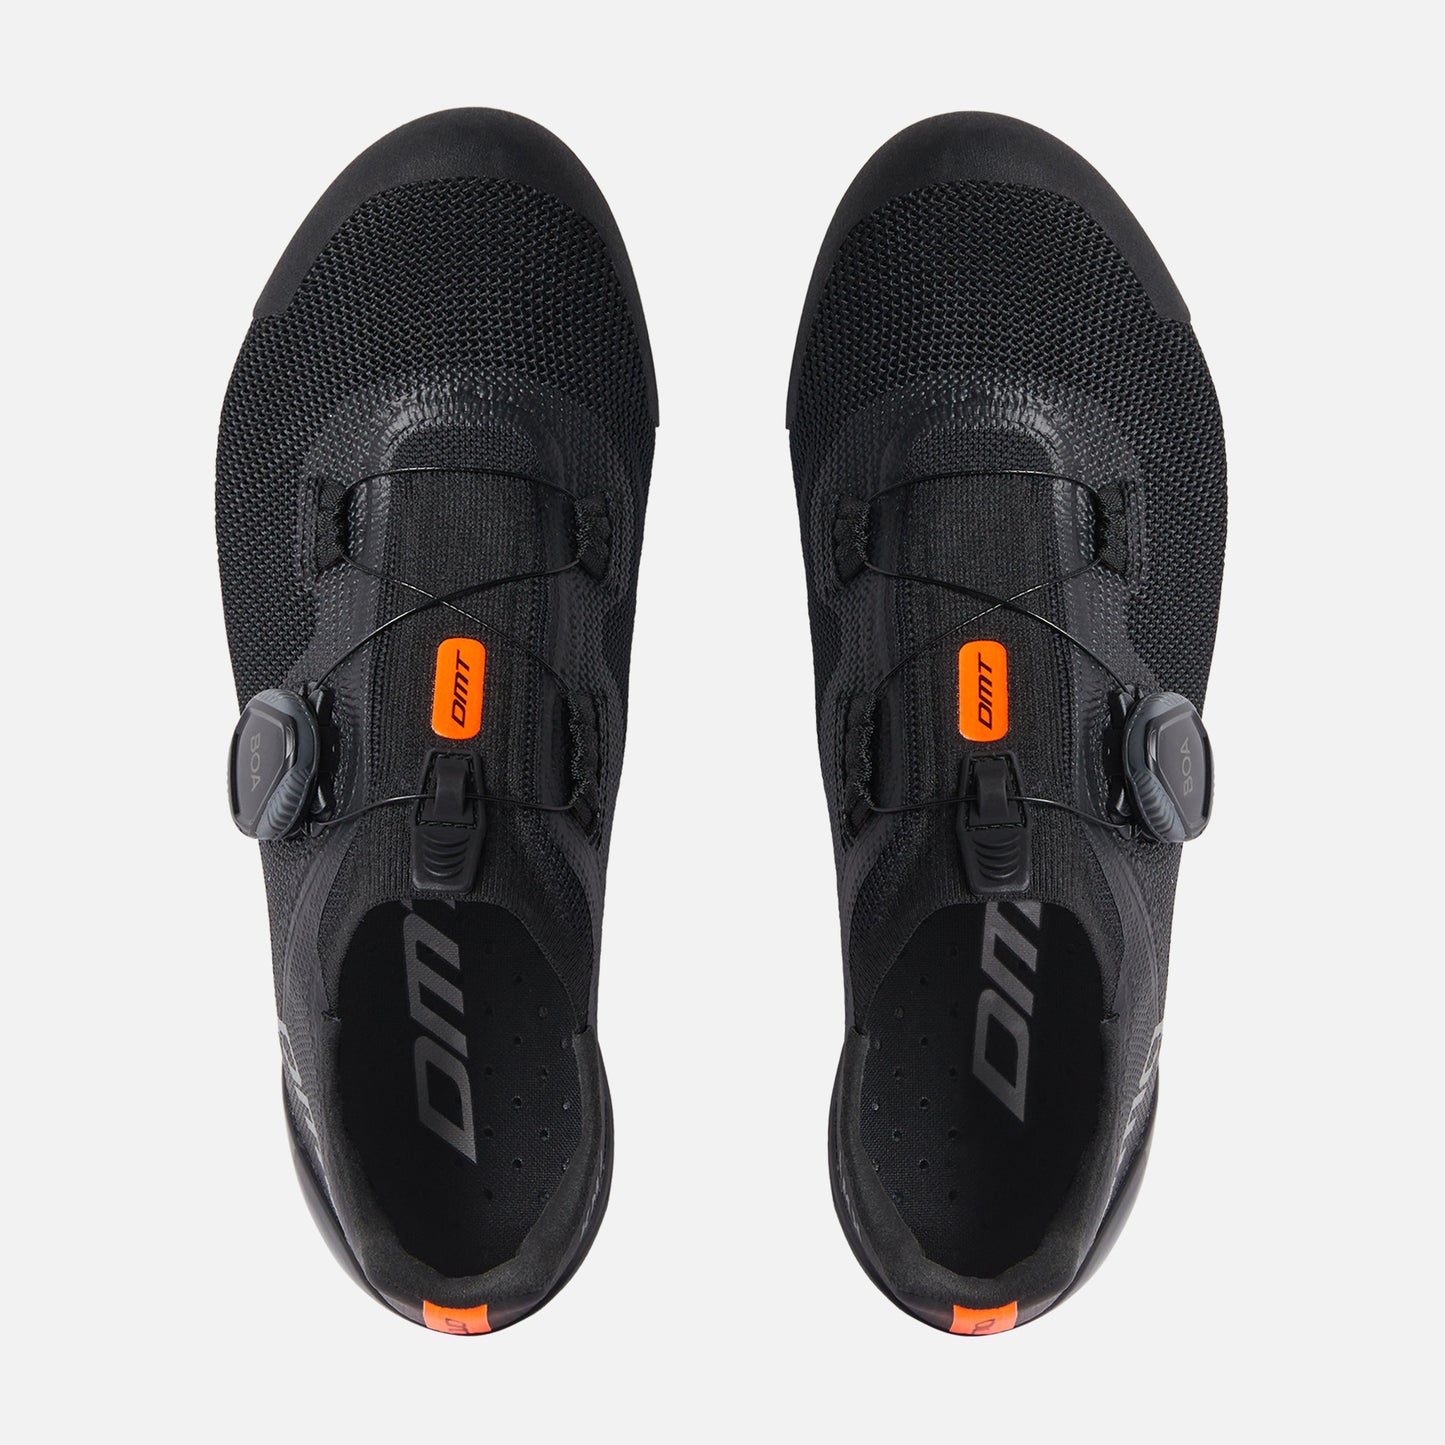 XC marathon shoes for cycling - DMT Cycling